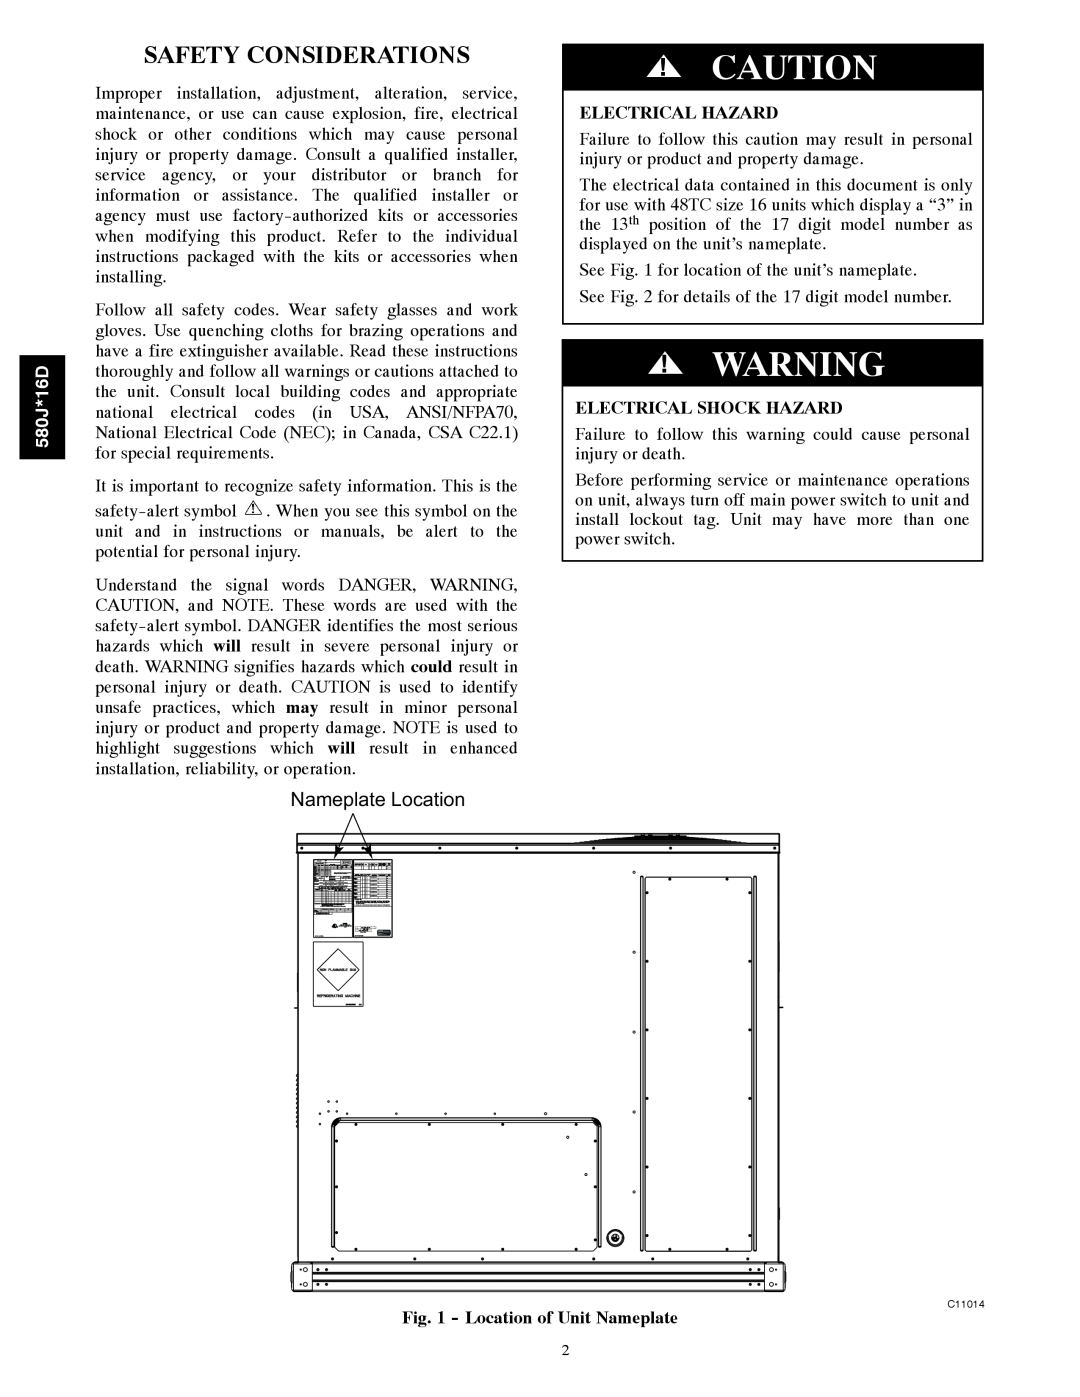 Bryant 580J*16D instruction manual Safety Considerations, Nameplate Location 